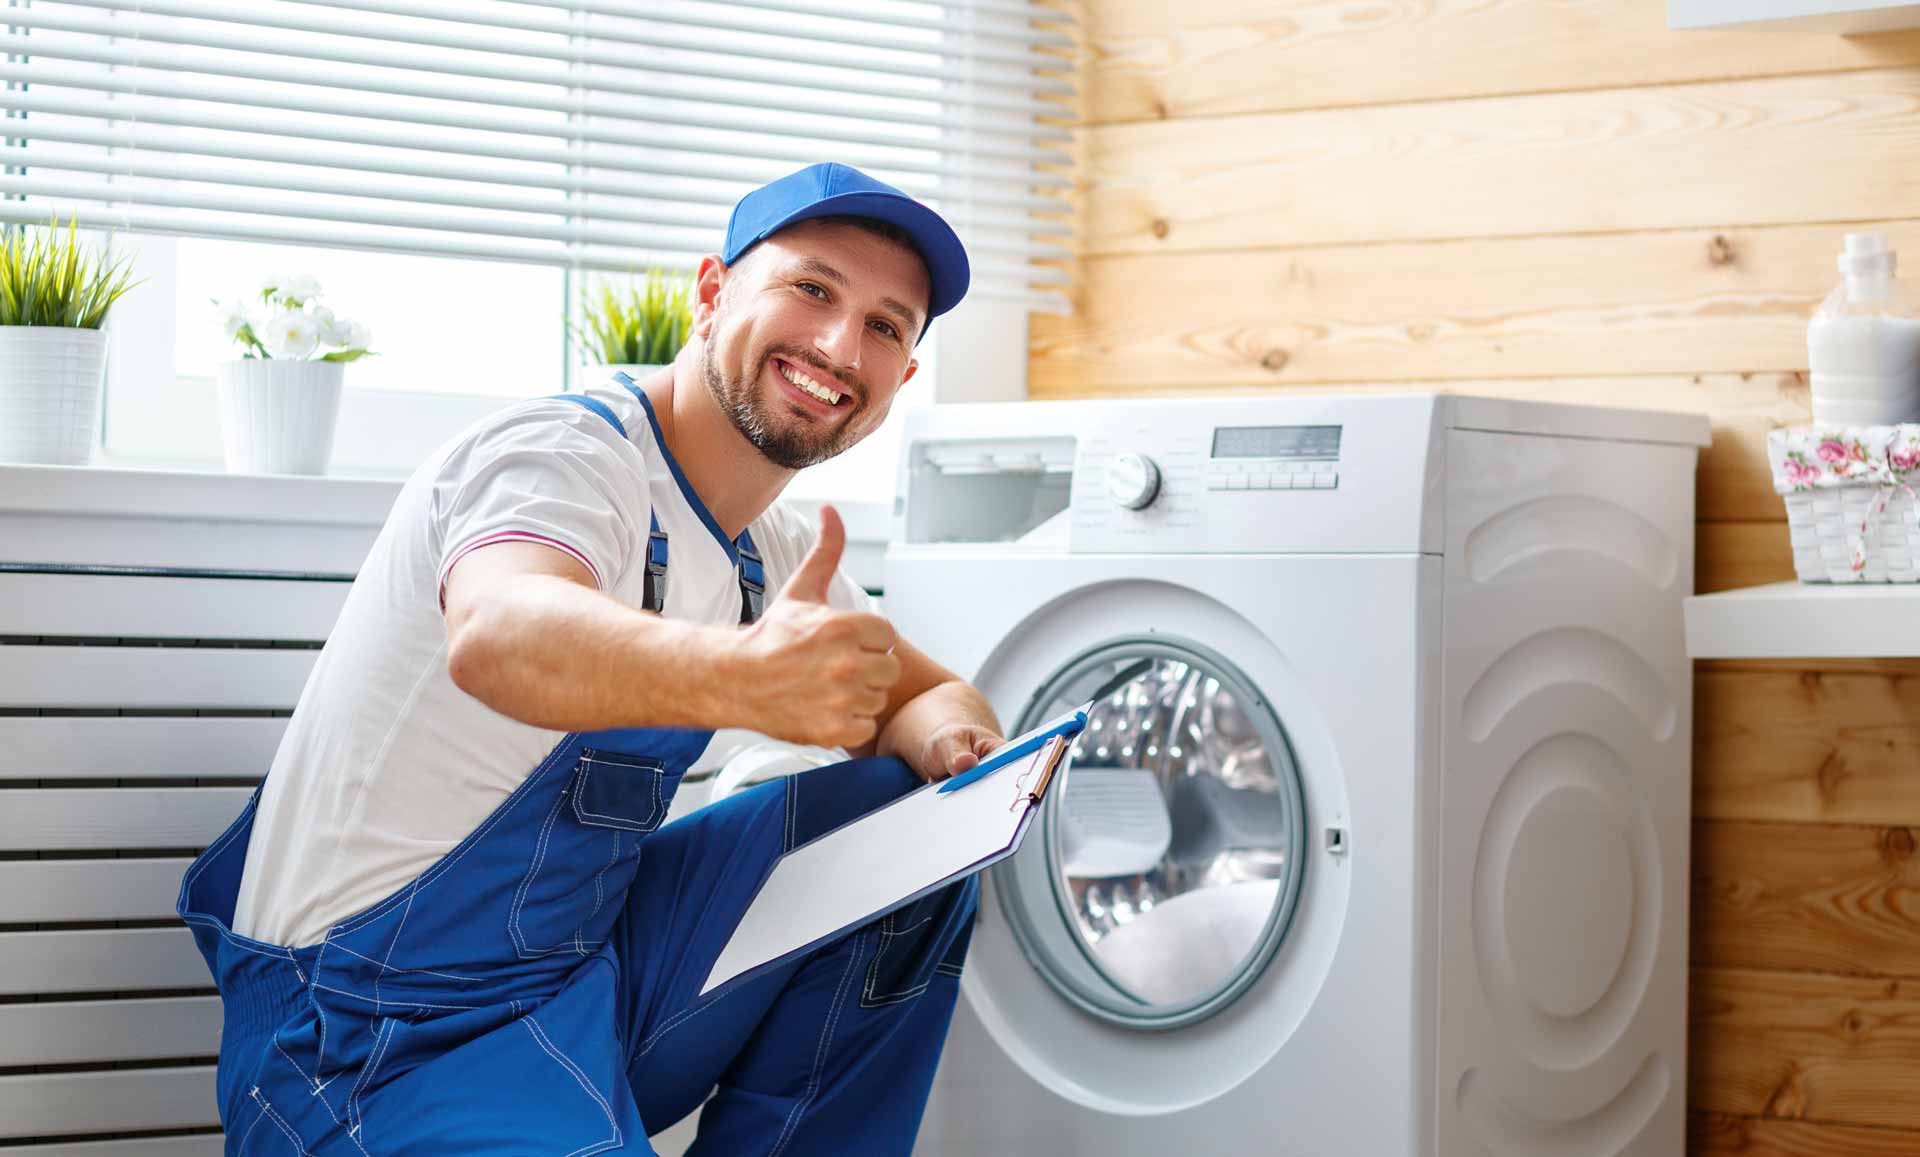 Appliance repair technician posing in front of a washer/dryer and giving a "thumbs up" gesture